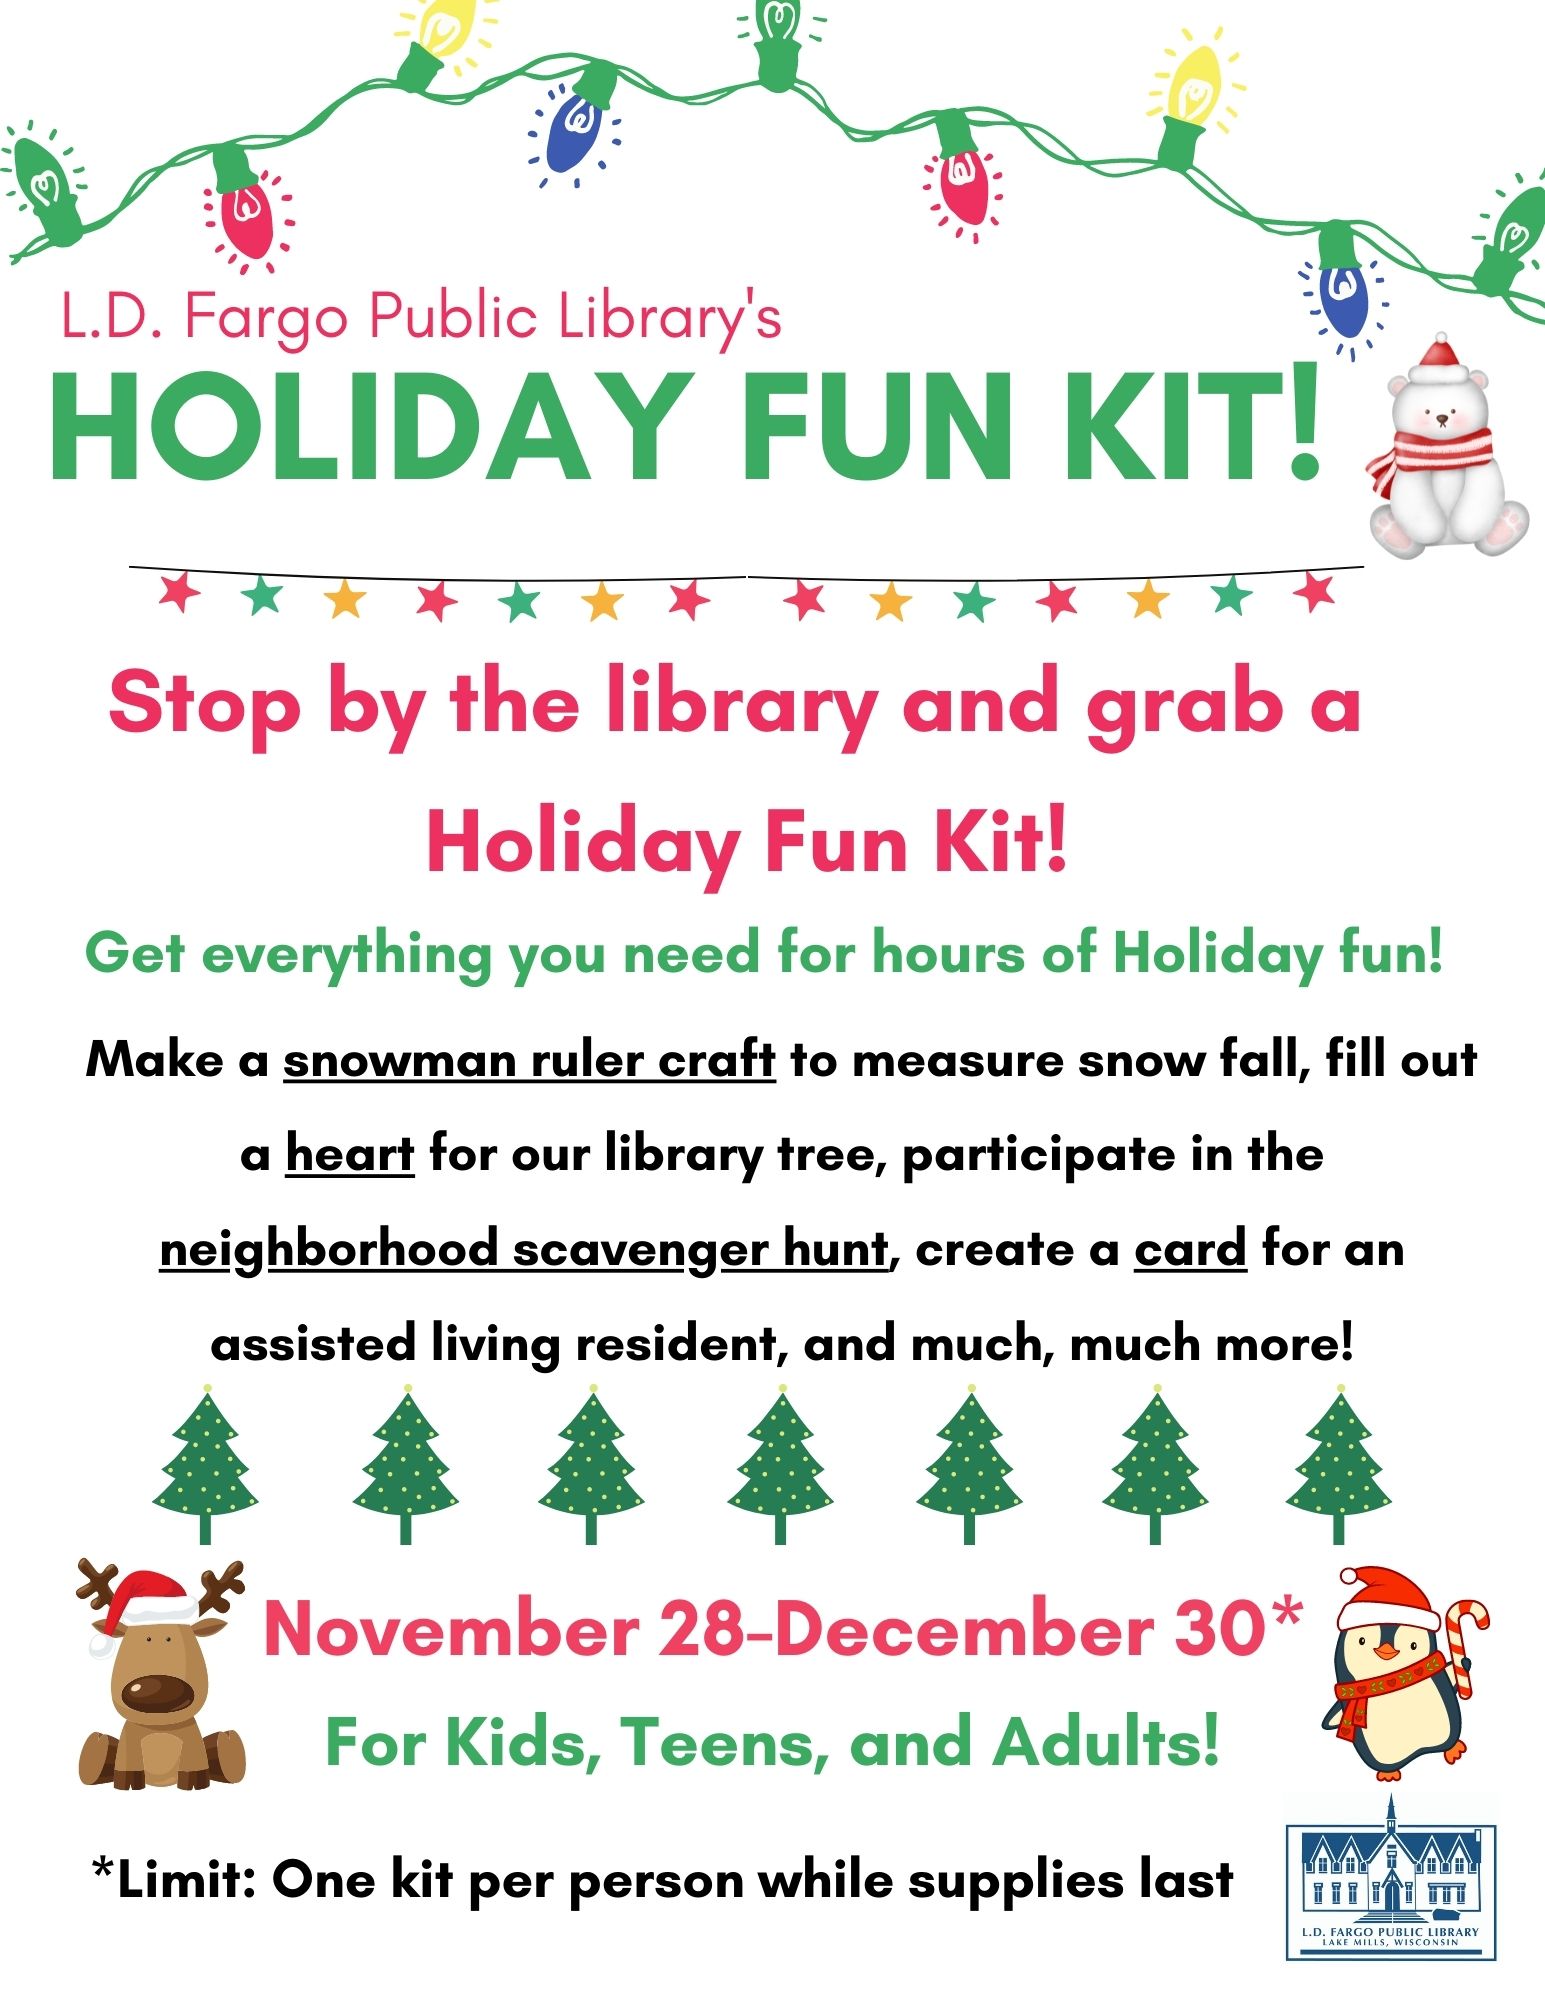 Holiday Fun Kit! Get everything you need for hours of Holiday fun! November 28-December 30 (while supplies last). For Kids, Teens, and Adults!